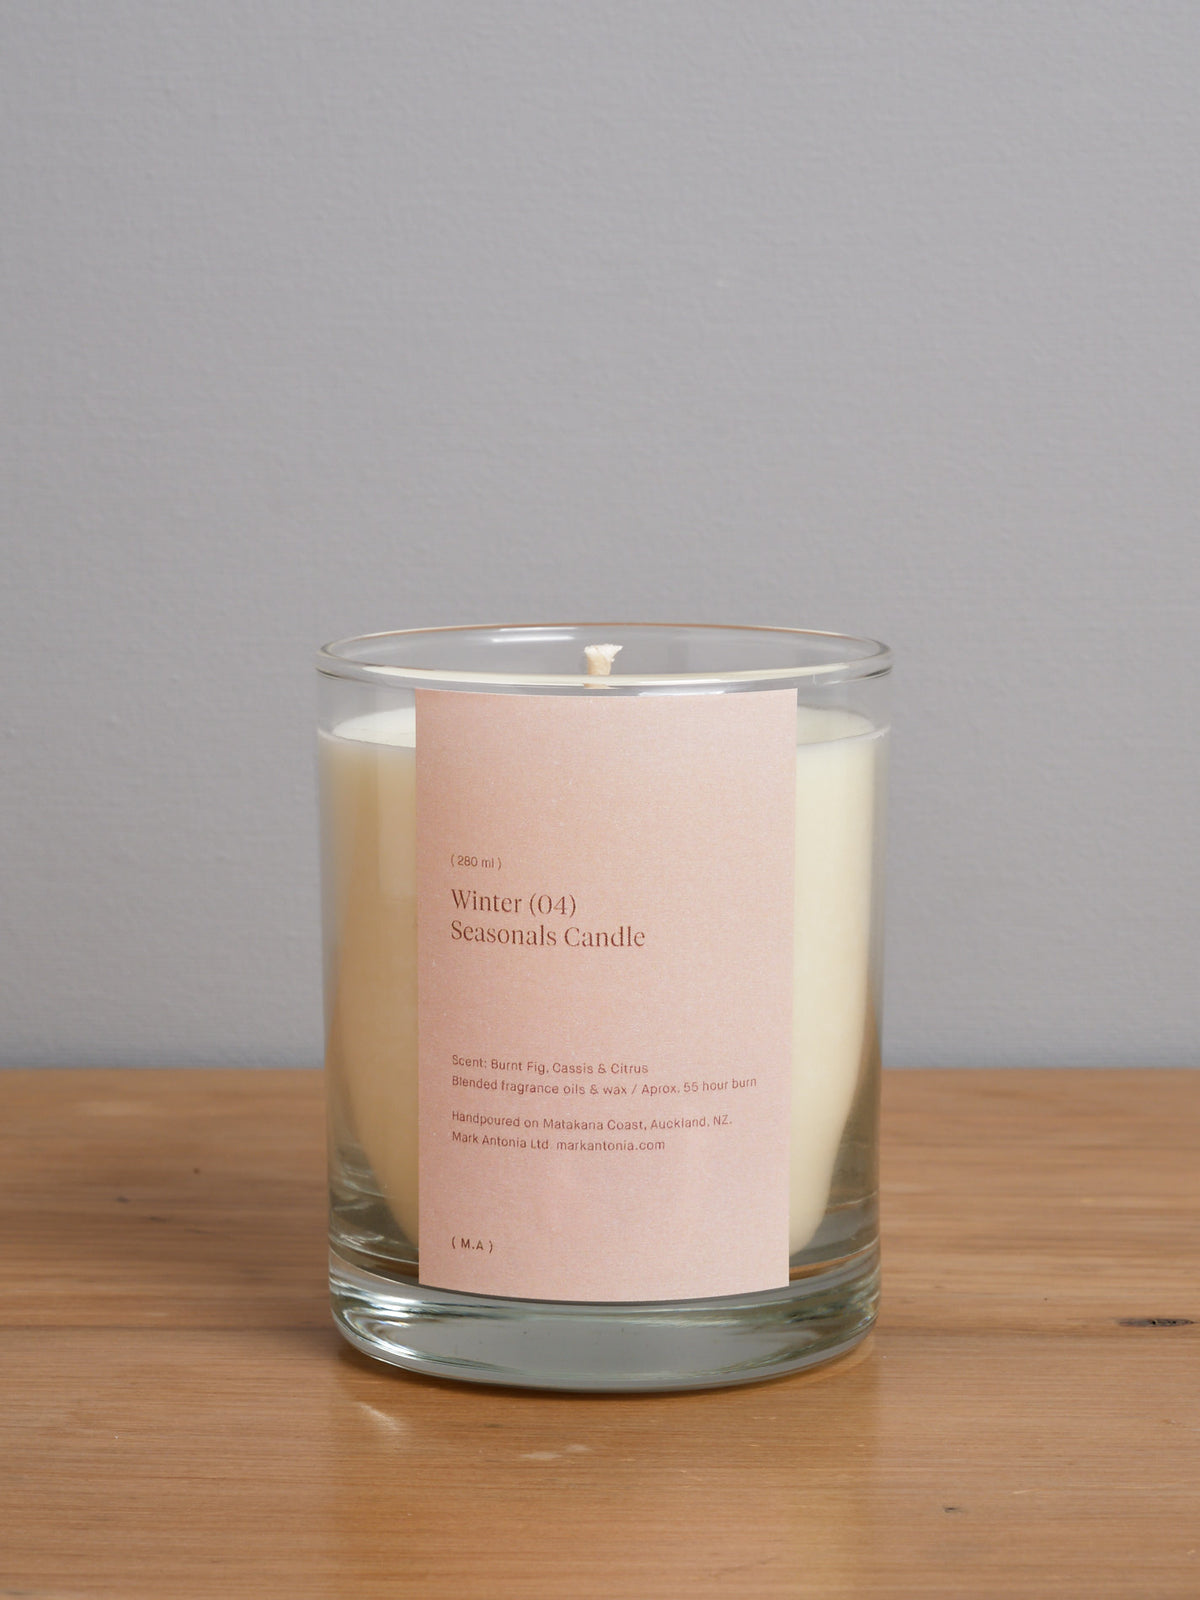 A Seasonal Candle (2.0) - Winter by Mark Antonia with a pink label sitting on a wooden table.